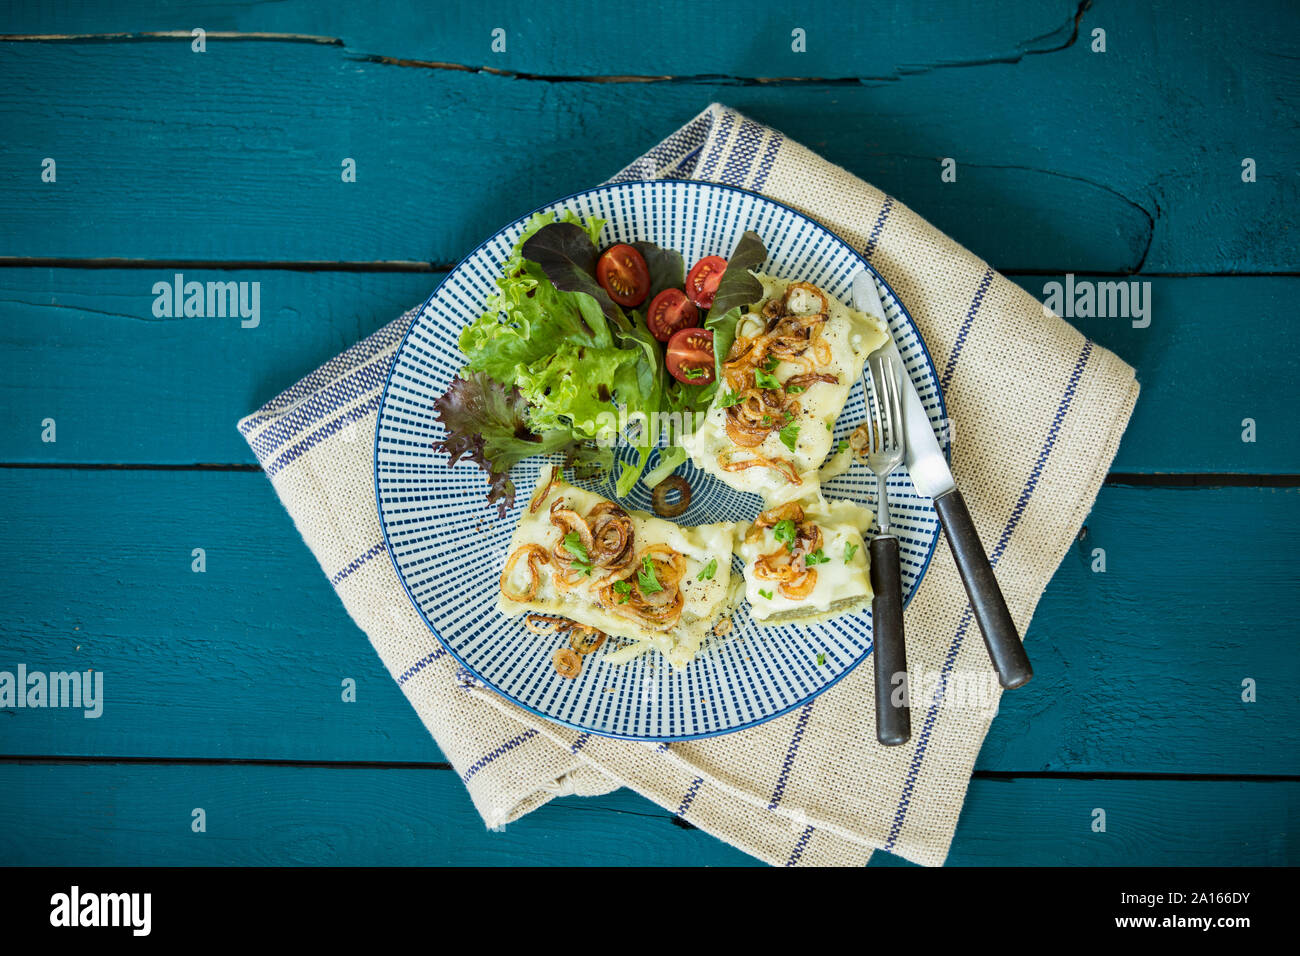 Swabian pockets with roasted onions, cheese and salad Stock Photo